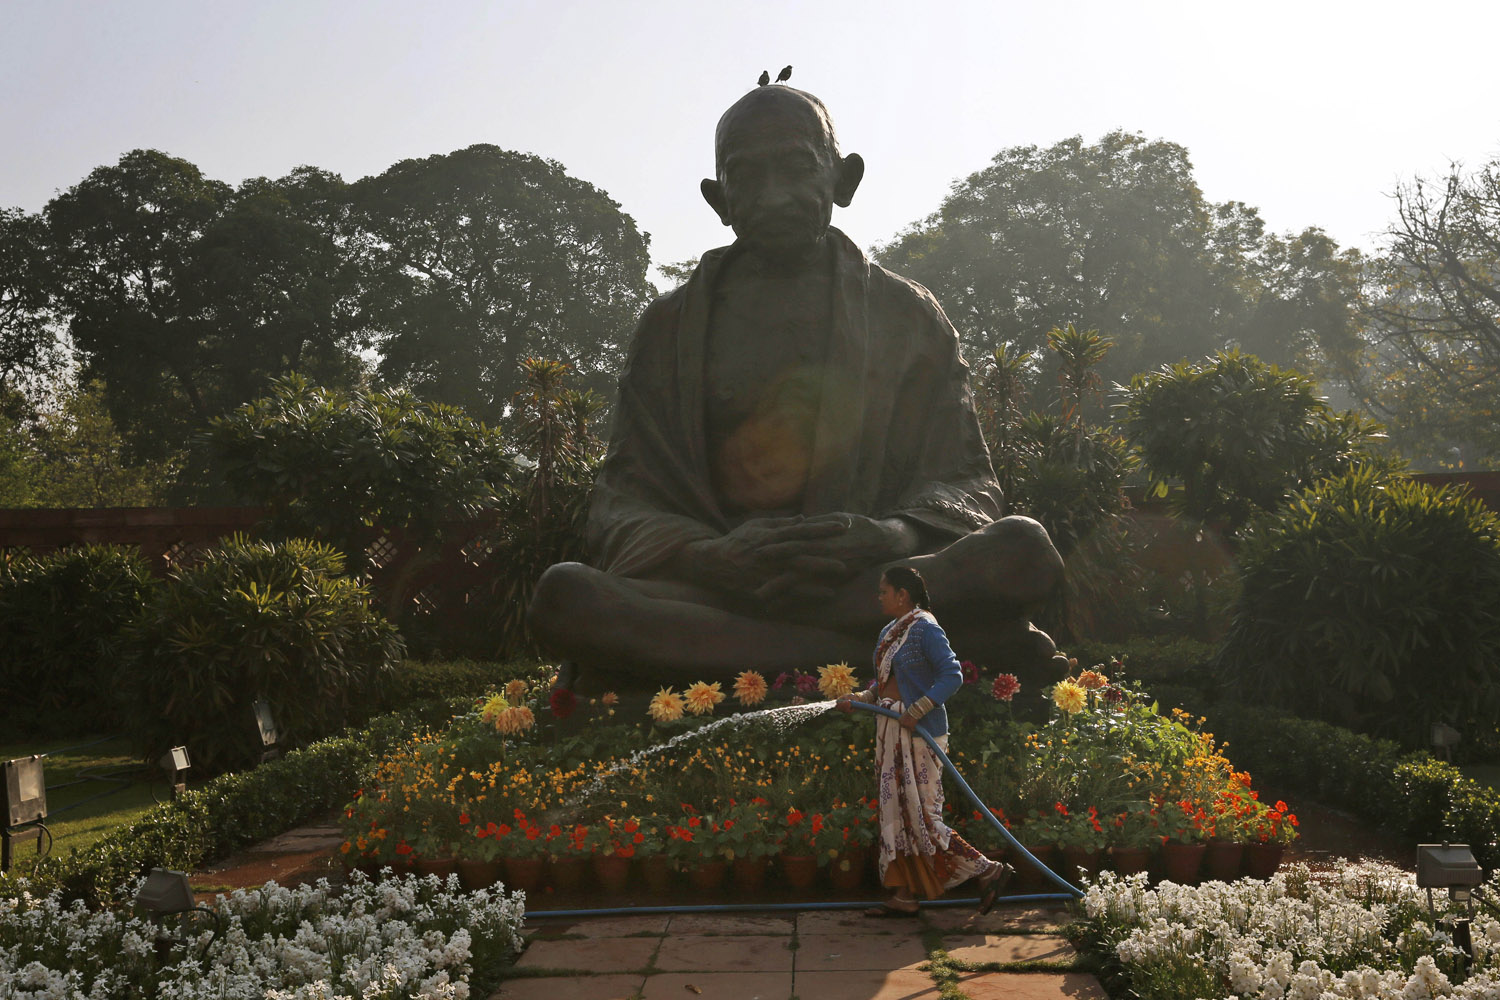 Feb. 28, 2013. A worker waters plants around a statue of Mahatma Gandhi inside the premises of Parliament as Indian Finance Minister Palaniappan Chidambaram delivers the annual budget in New Delhi.